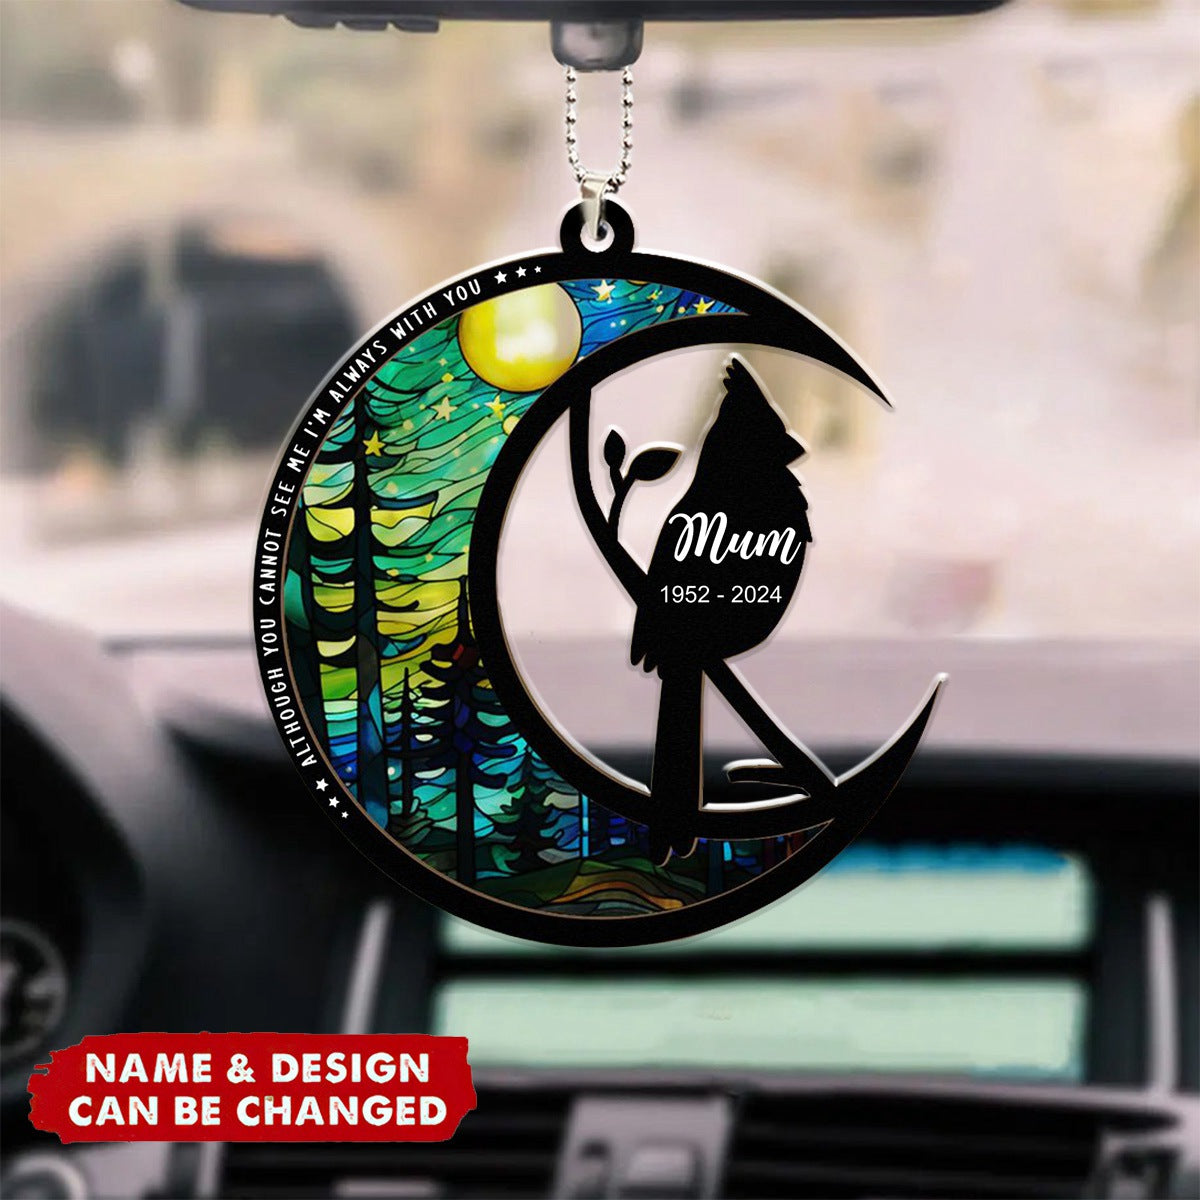 Although You Cannot See Me I'm Always With You - Personalized Car Ornament